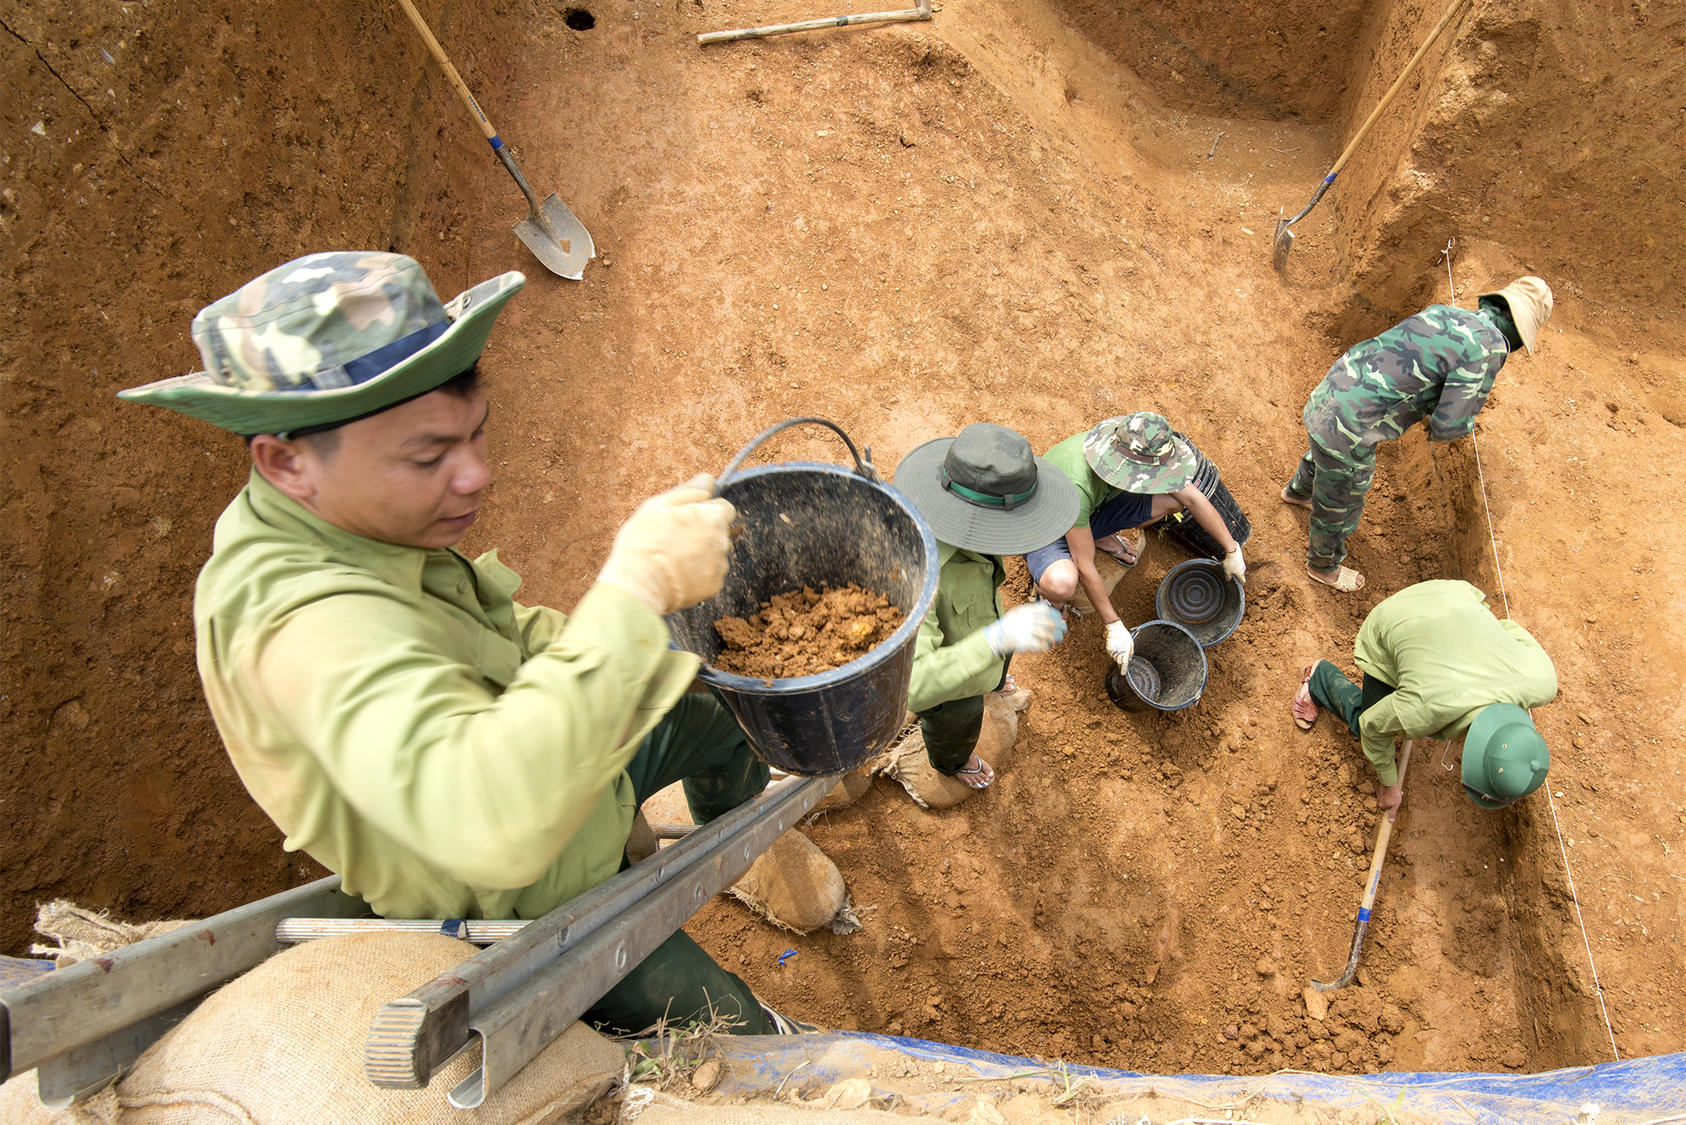 The Defense POW/MIA Accounting Agency’s Vietnamese support unit searches for Americans’ remains, Thua Thien Hue Province, Vietnam, June 17, 2016. (Department of Defense/MC3 Armando Velez)